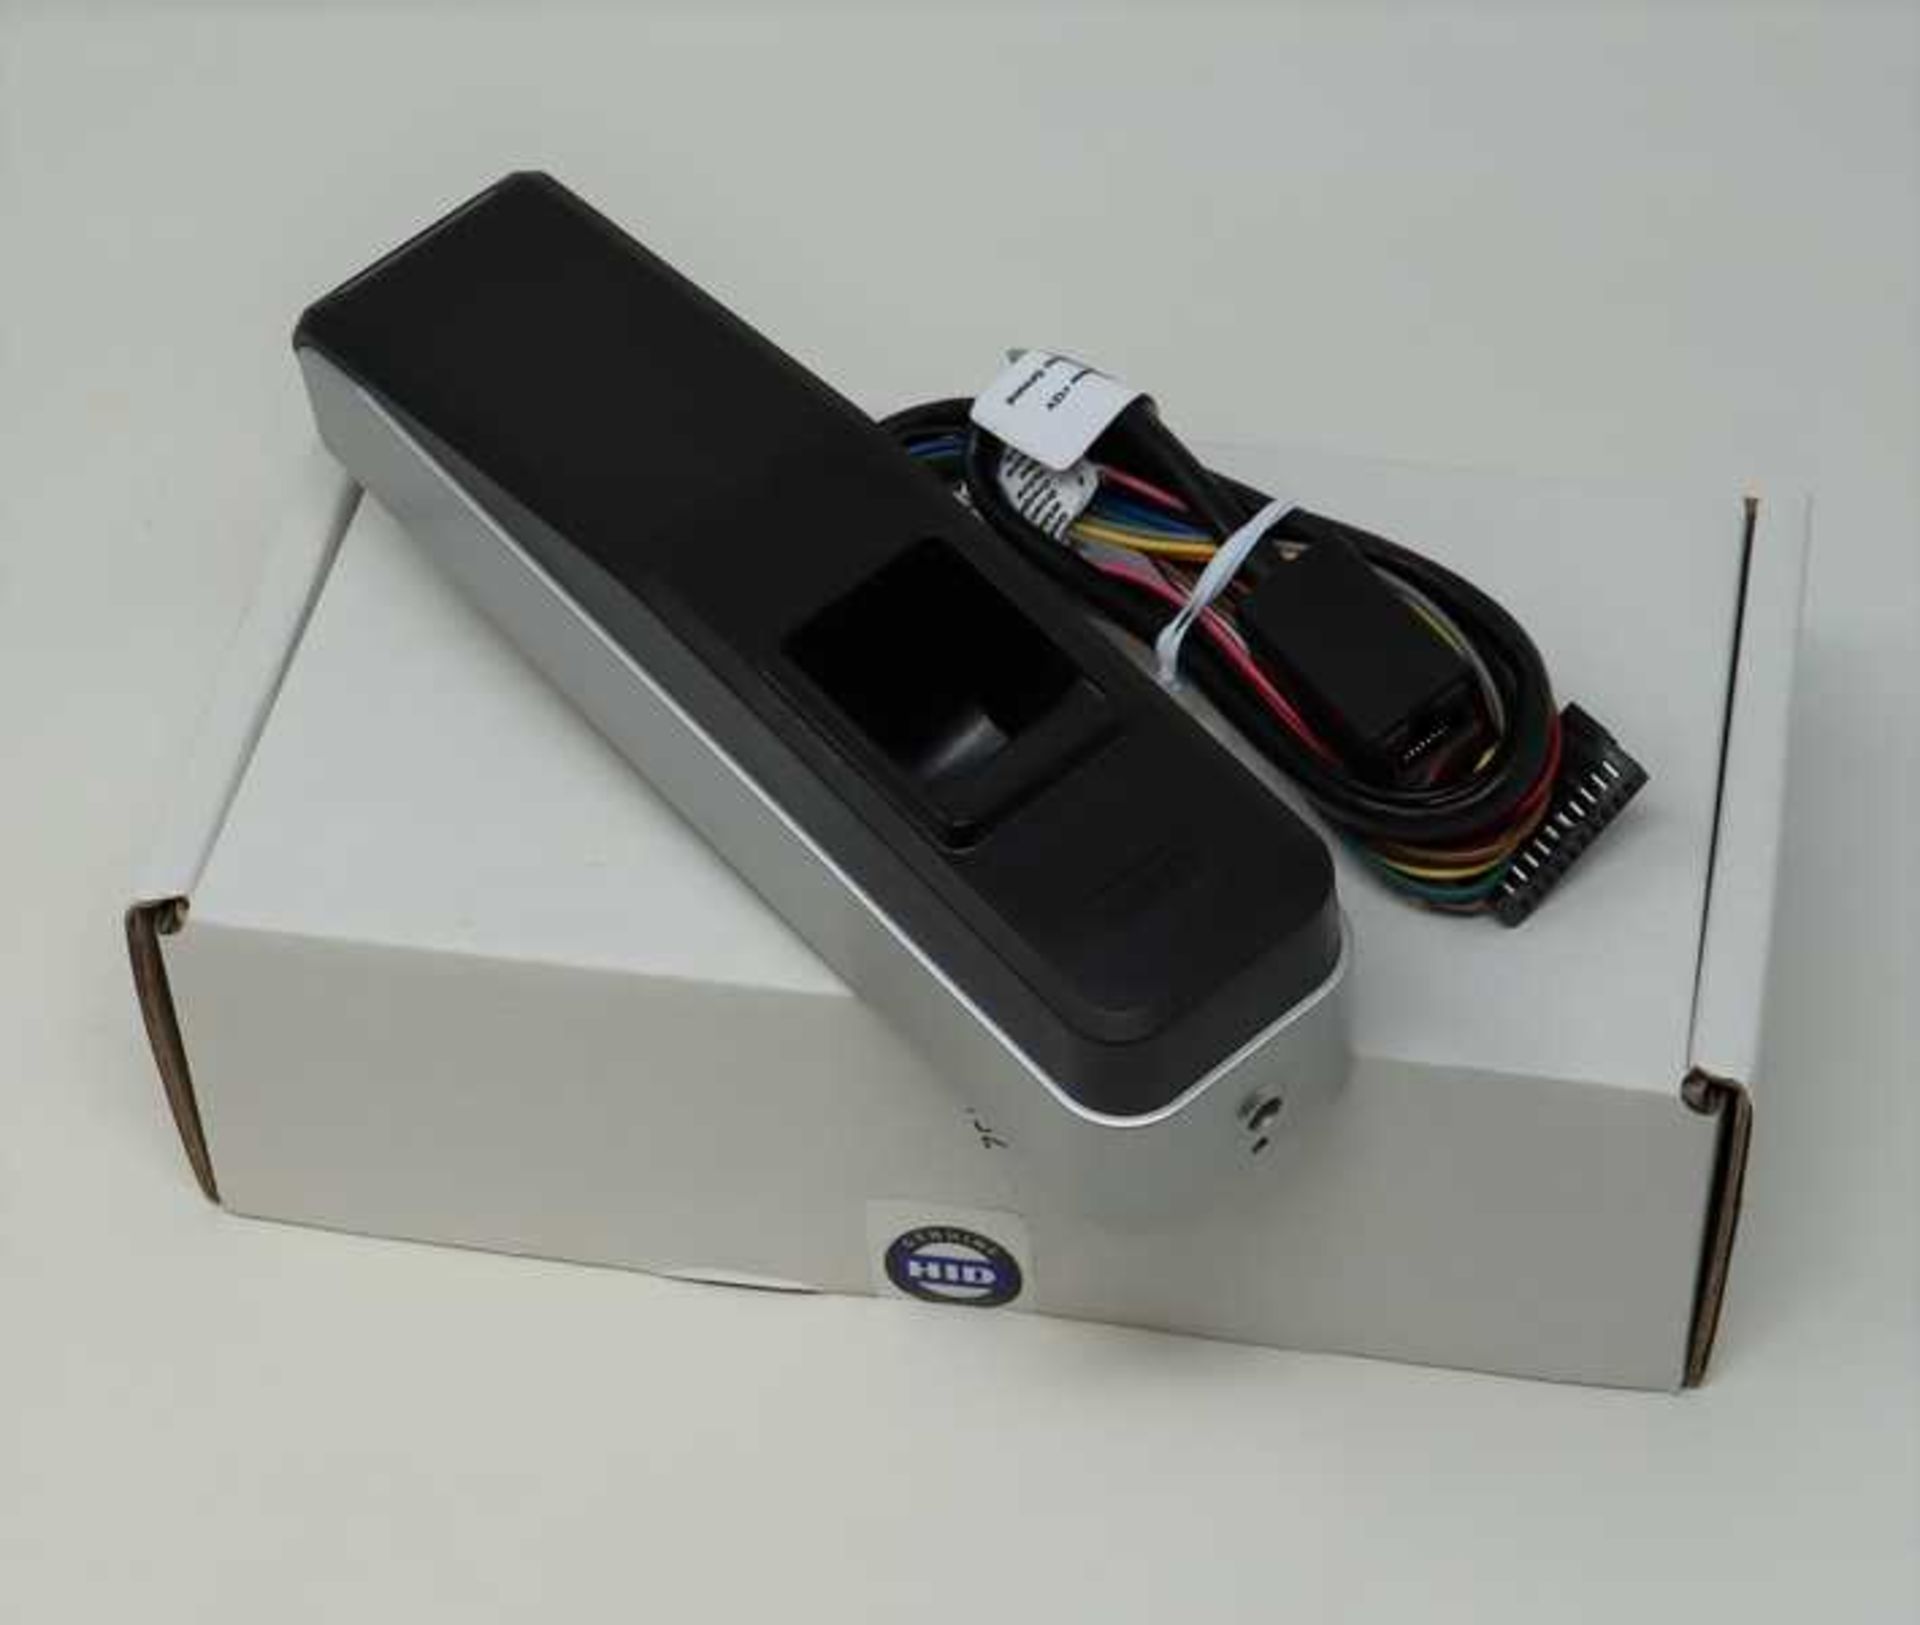 A boxed as new HID iCLASS SE RB25F Mullion Fingerprint Reader/Controller (P/N: RB25FNK-00-0000-0000)